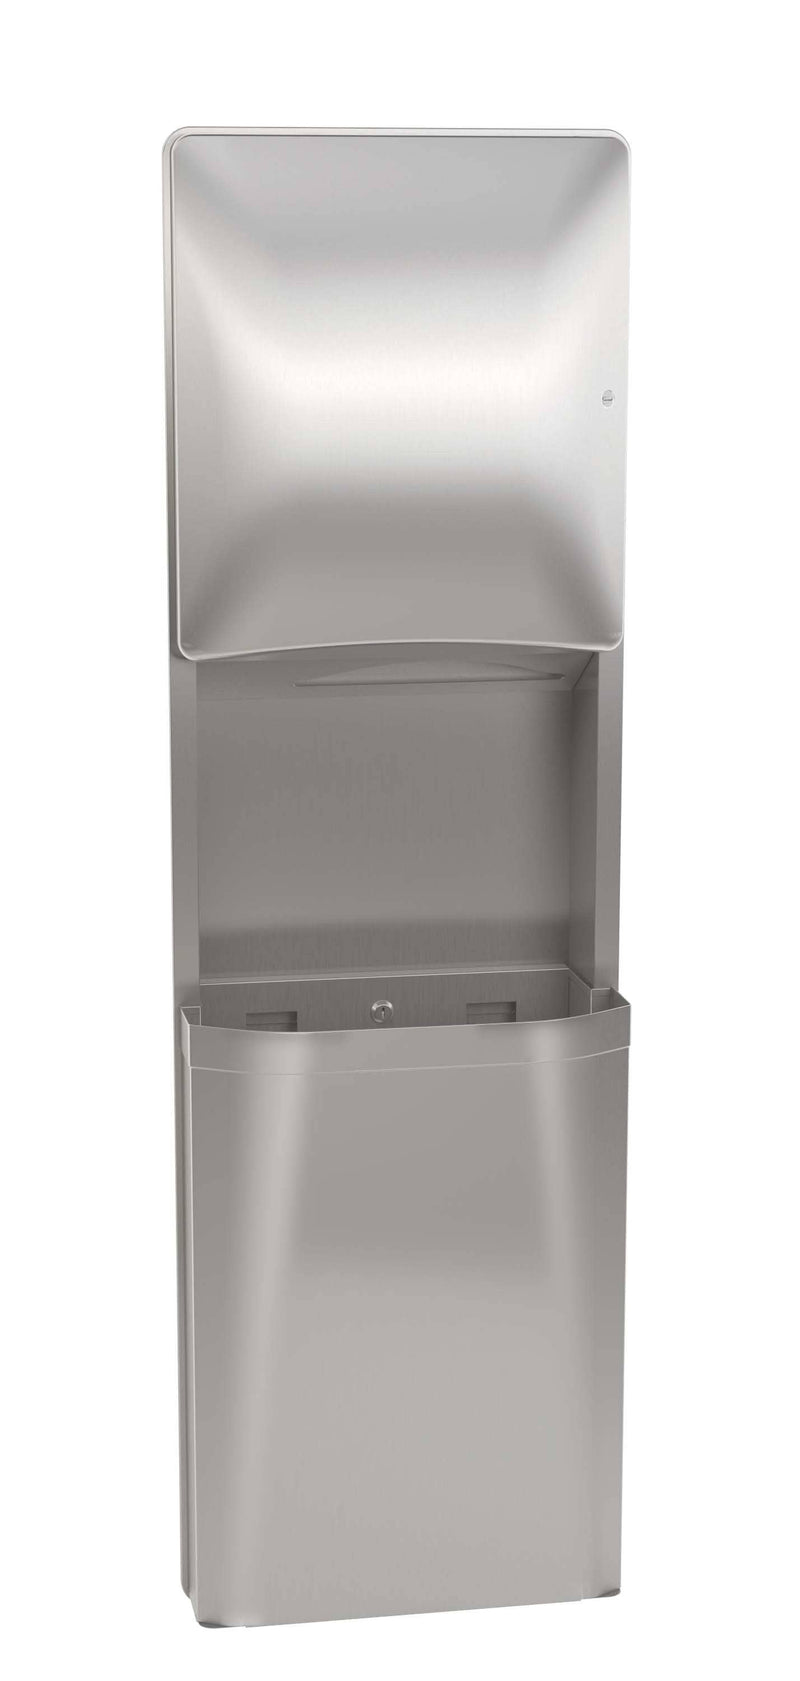 Bradley 2A95-36 Combination Toilet Paper Dispenser/Waste Receptacle, Recessed-Mounted, Stainless Steel - TotalRestroom.com